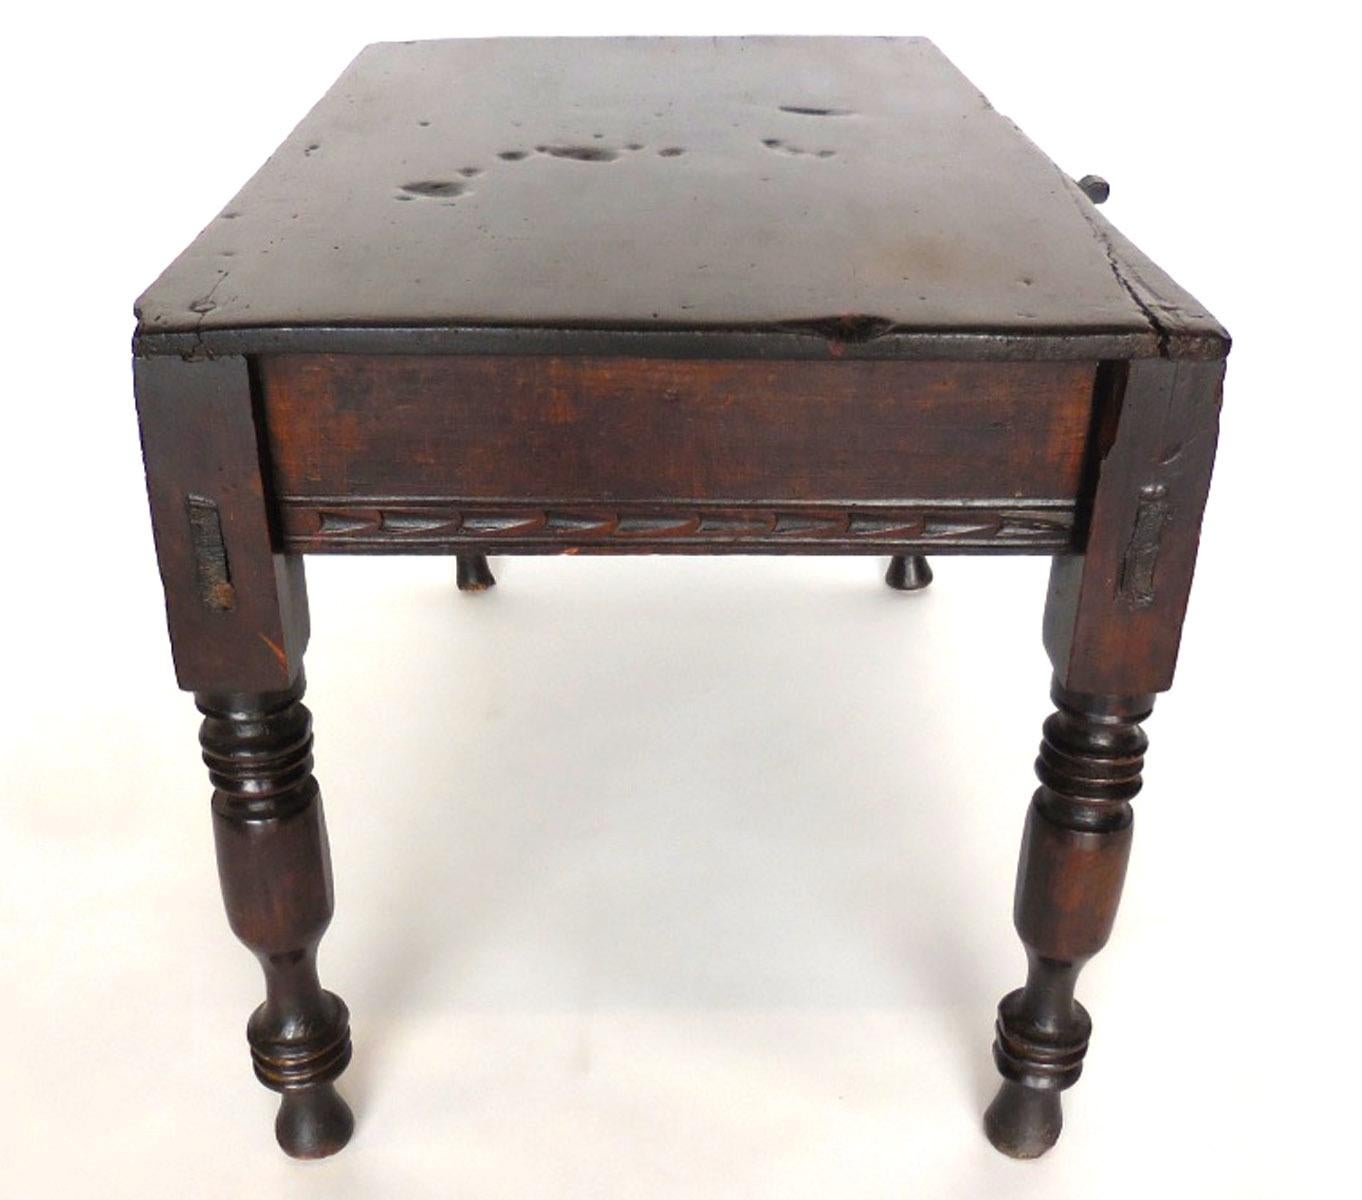 Guatemalan 19th Century Child's Table with Carvings and Drawer